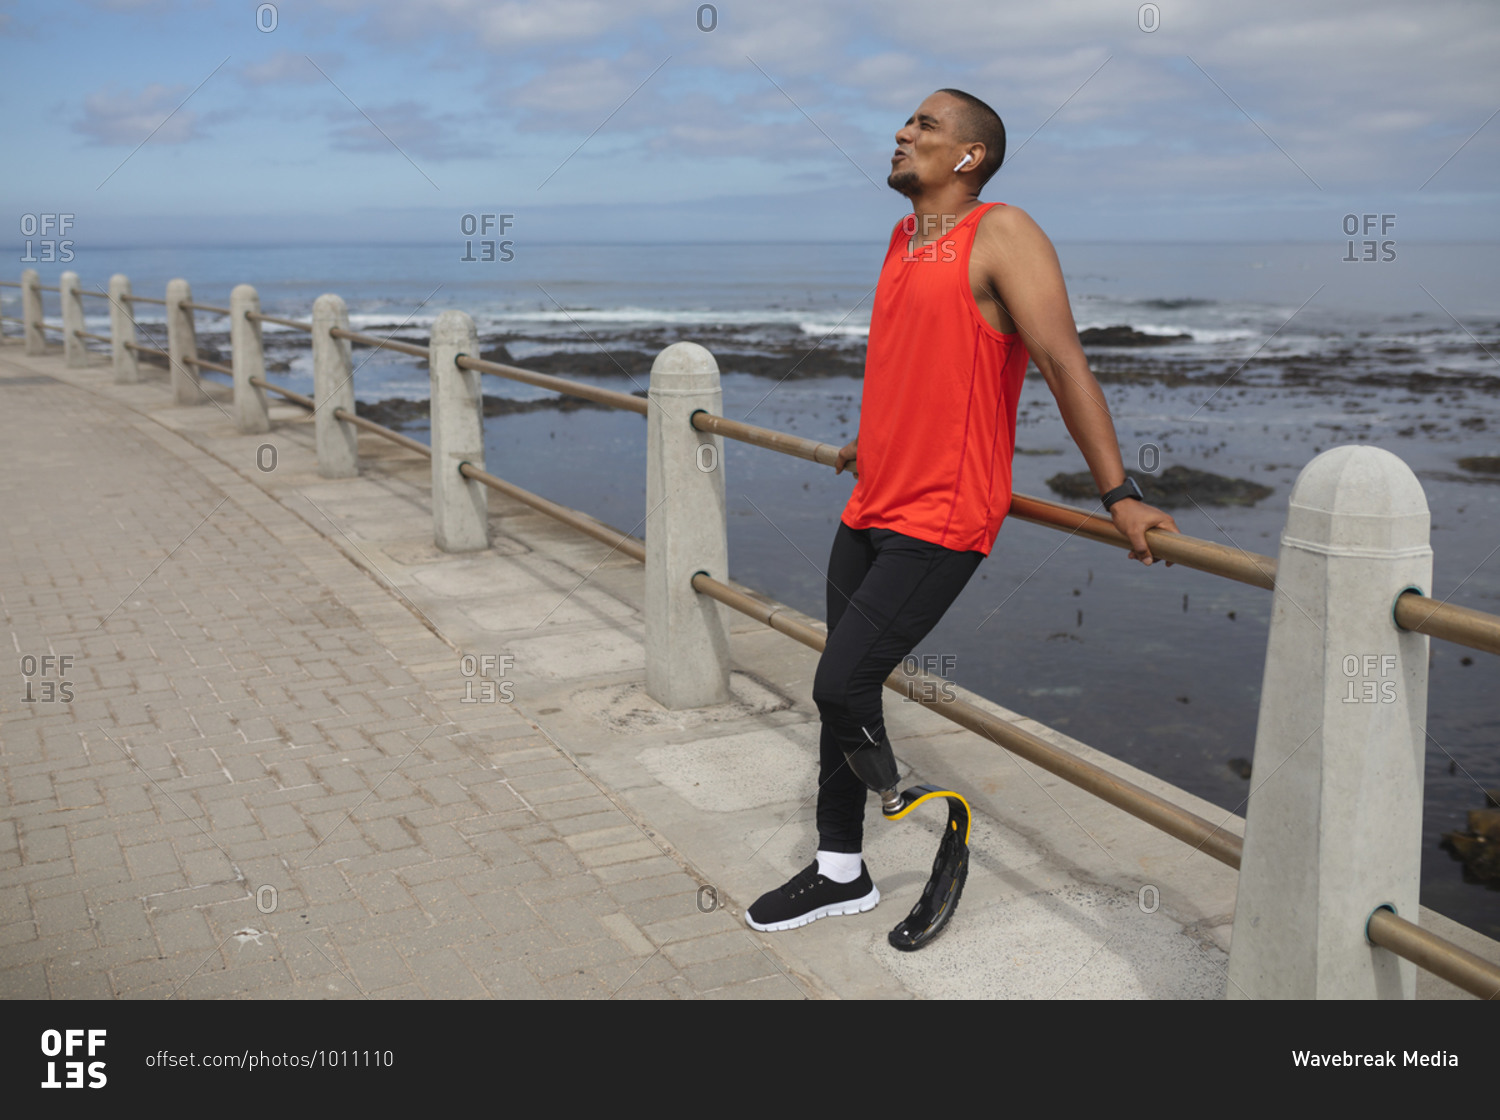 Disabled mixed race man with a prosthetic leg and running blade working out by the coast wearing wireless earphones, taking a break leaning on a fence. Fitness disability healthy lifestyle.